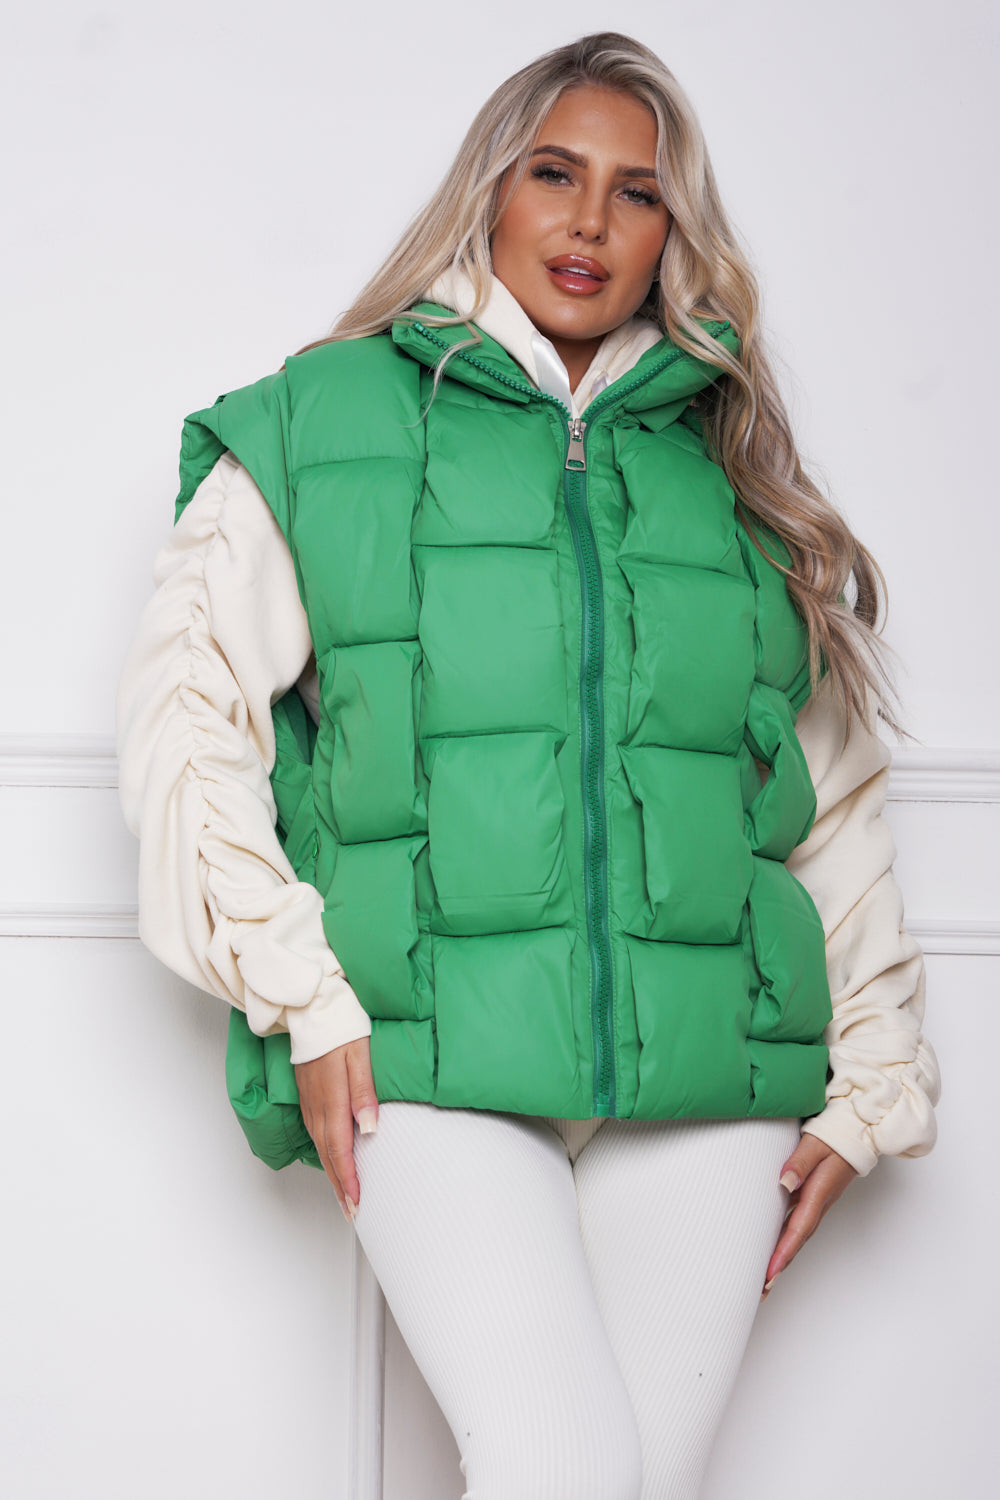 Dova Luxury Quilted Gillet Green